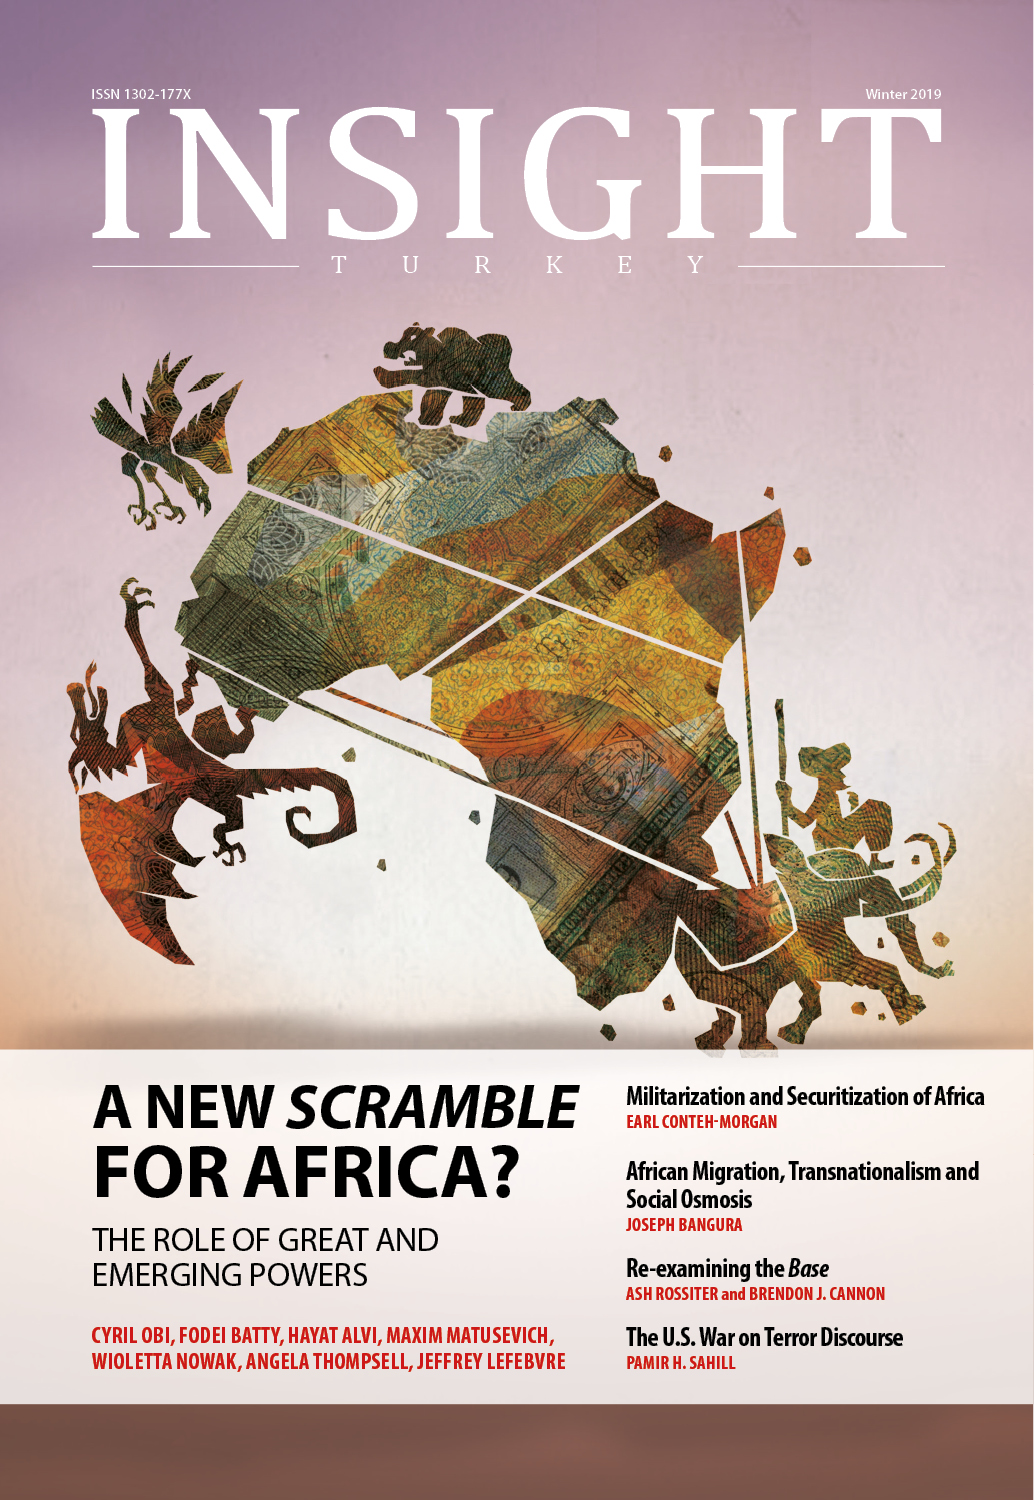 Insight Turkey Publishes Its Latest Issue “A New Scramble for Africa? The Role of Great and Emerging Powers”